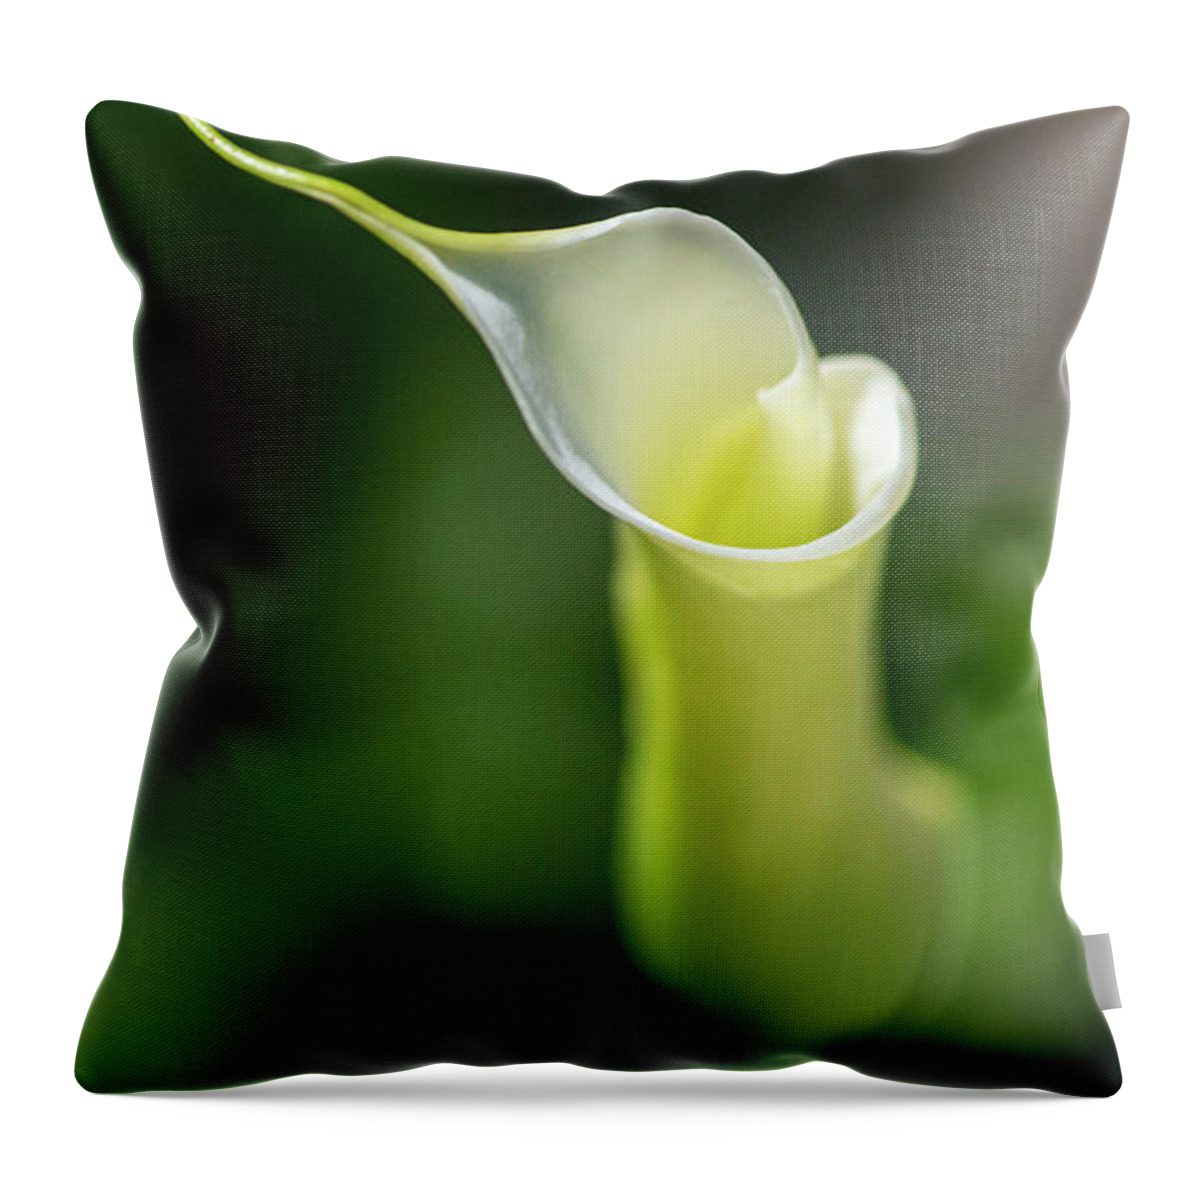 Calla Lily Throw Pillow featuring the photograph Calla Lily 2 by Kathy Paynter